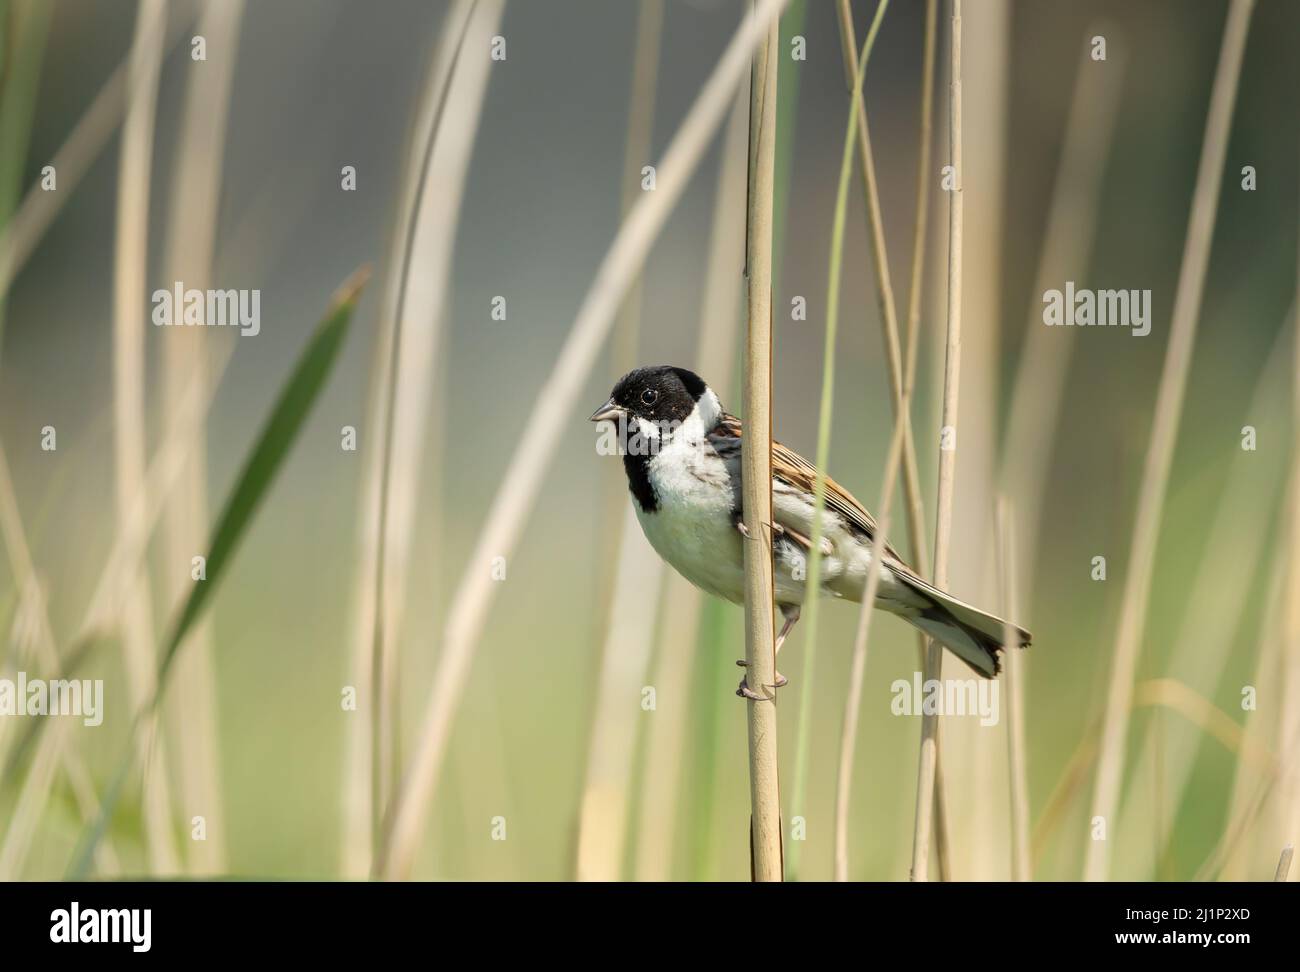 Close up of a perched common reed bunting, UK. Stock Photo